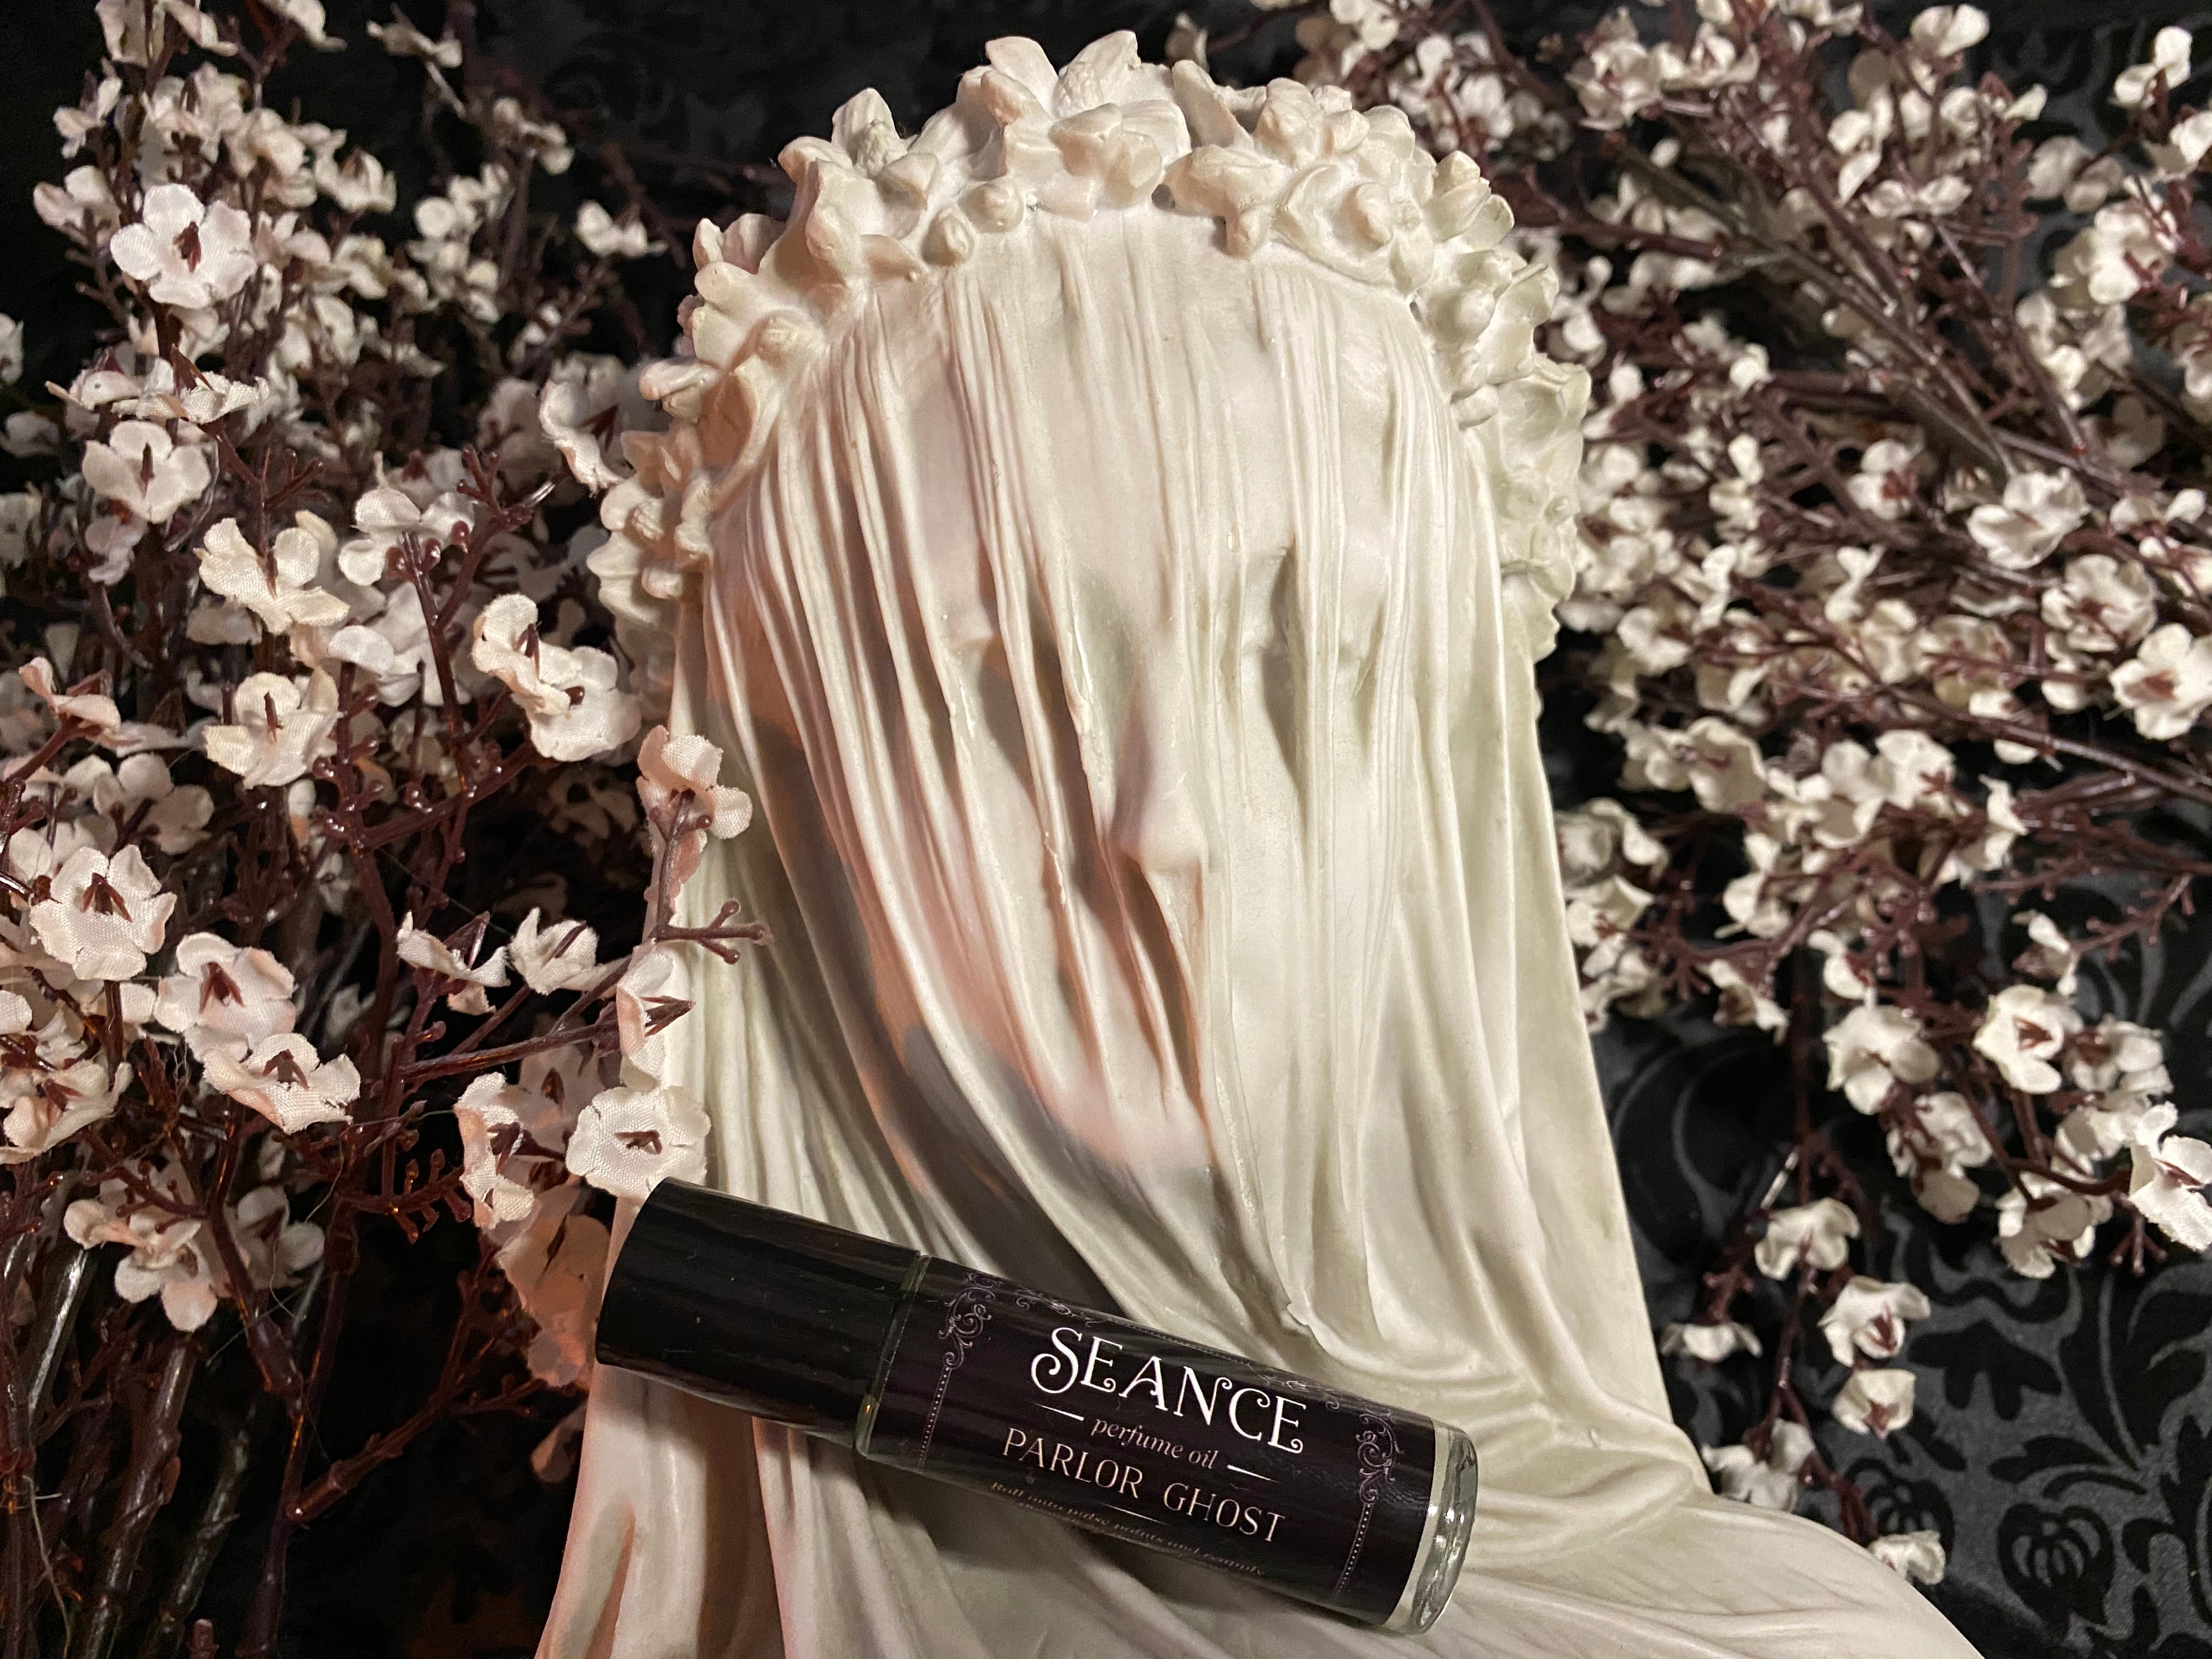 Parlor Ghost perfume